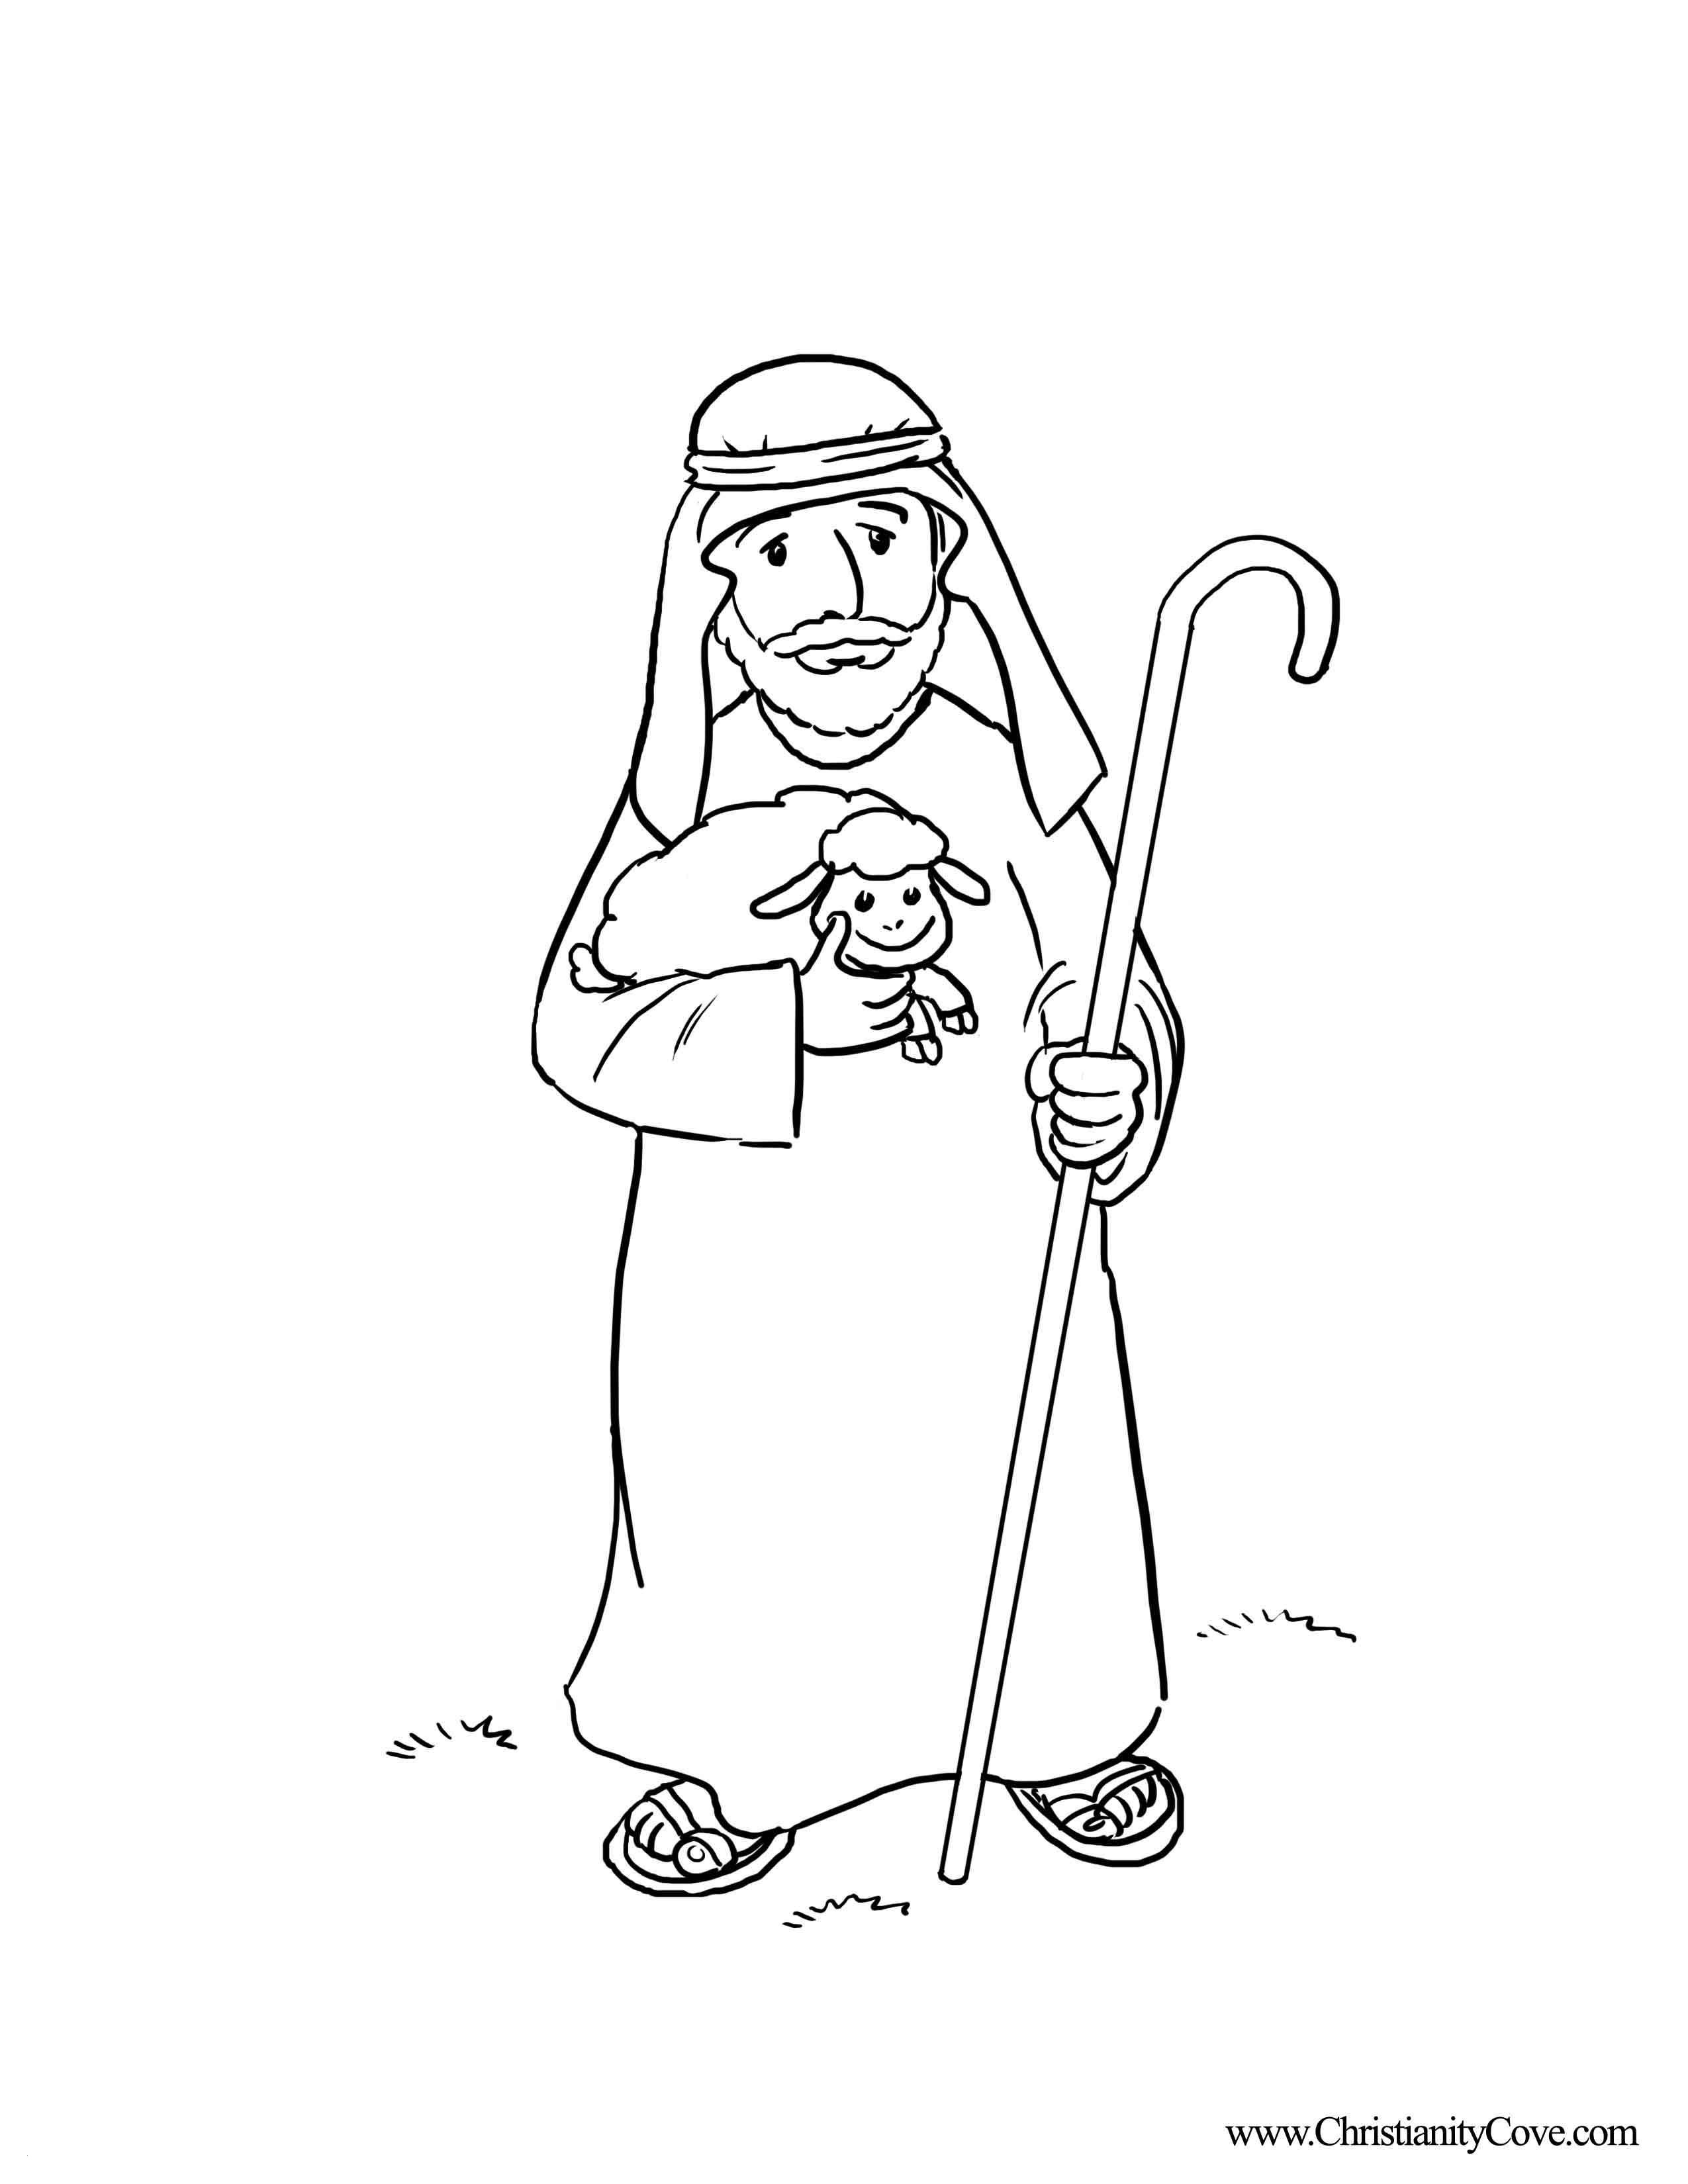 Coloring Pages Sheep And The Shepherd Jesus The Good Shepherd Coloring Pages Refrence Page Best Sheep I Am